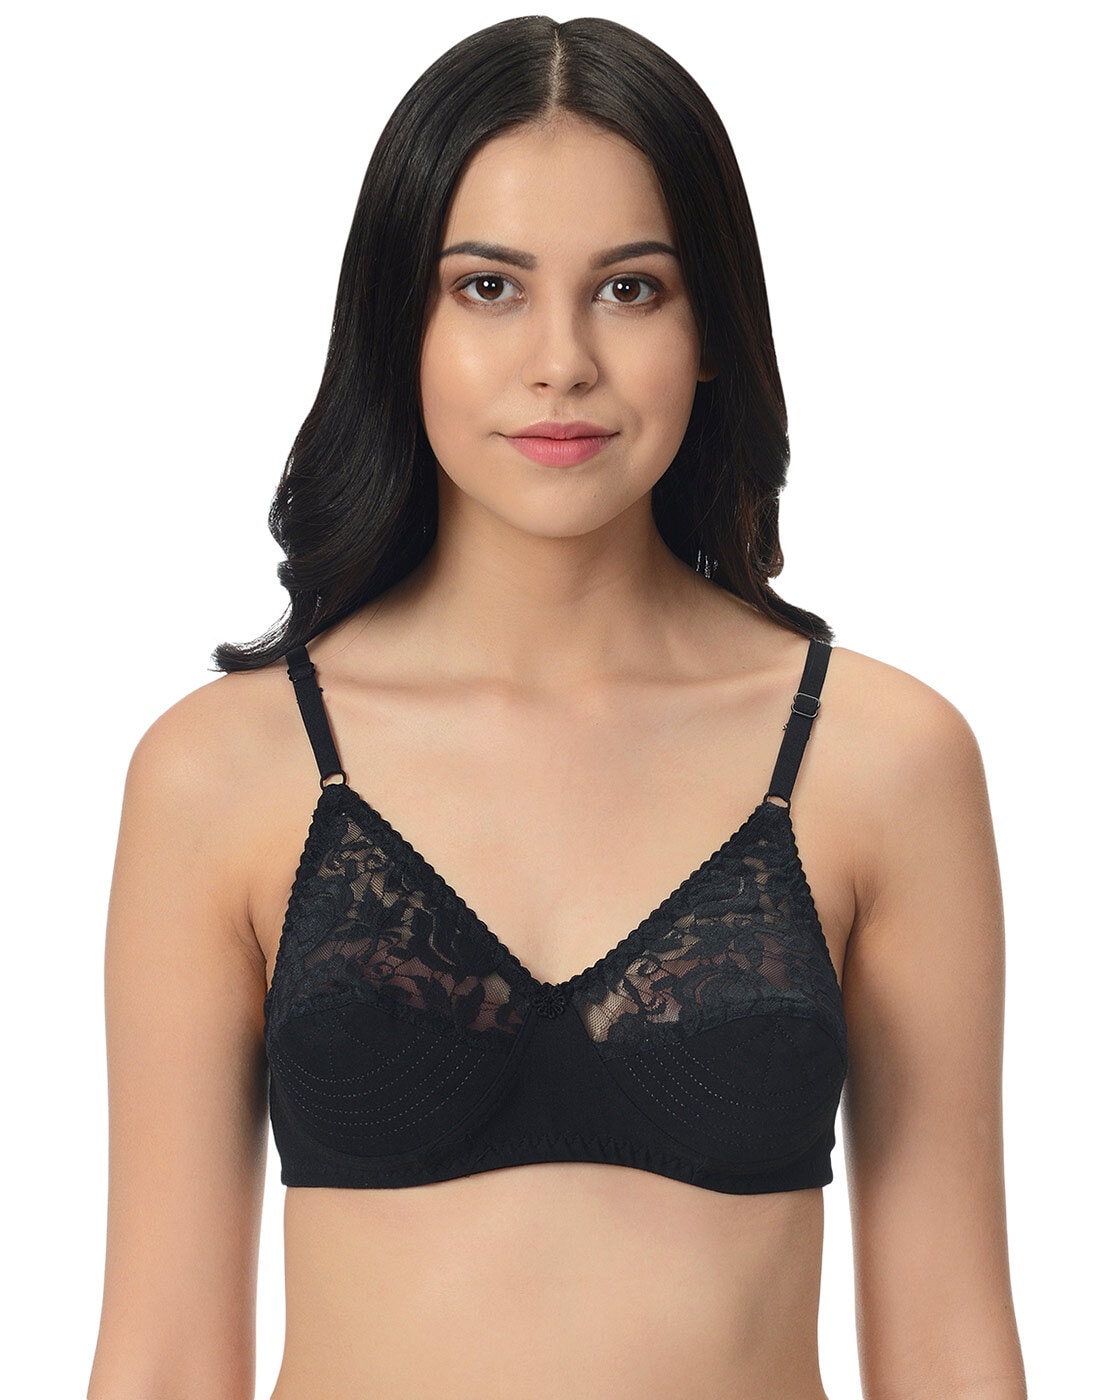 Gopalvilla Women Push-up Lightly Padded Bra - Buy Black Gopalvilla Women  Push-up Lightly Padded Bra Online at Best Prices in India